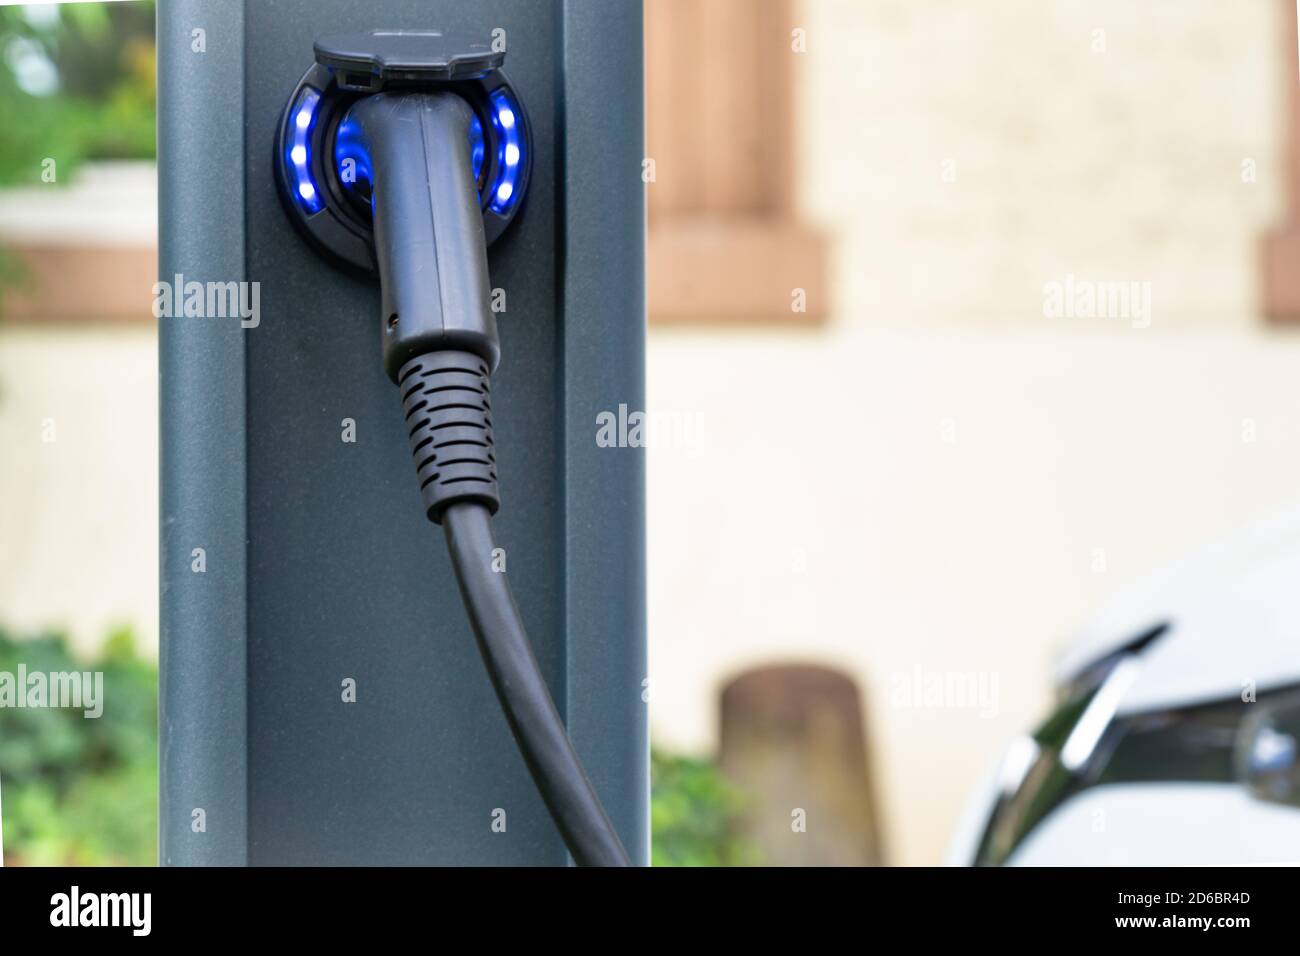 Charging an electric car Stock Photo